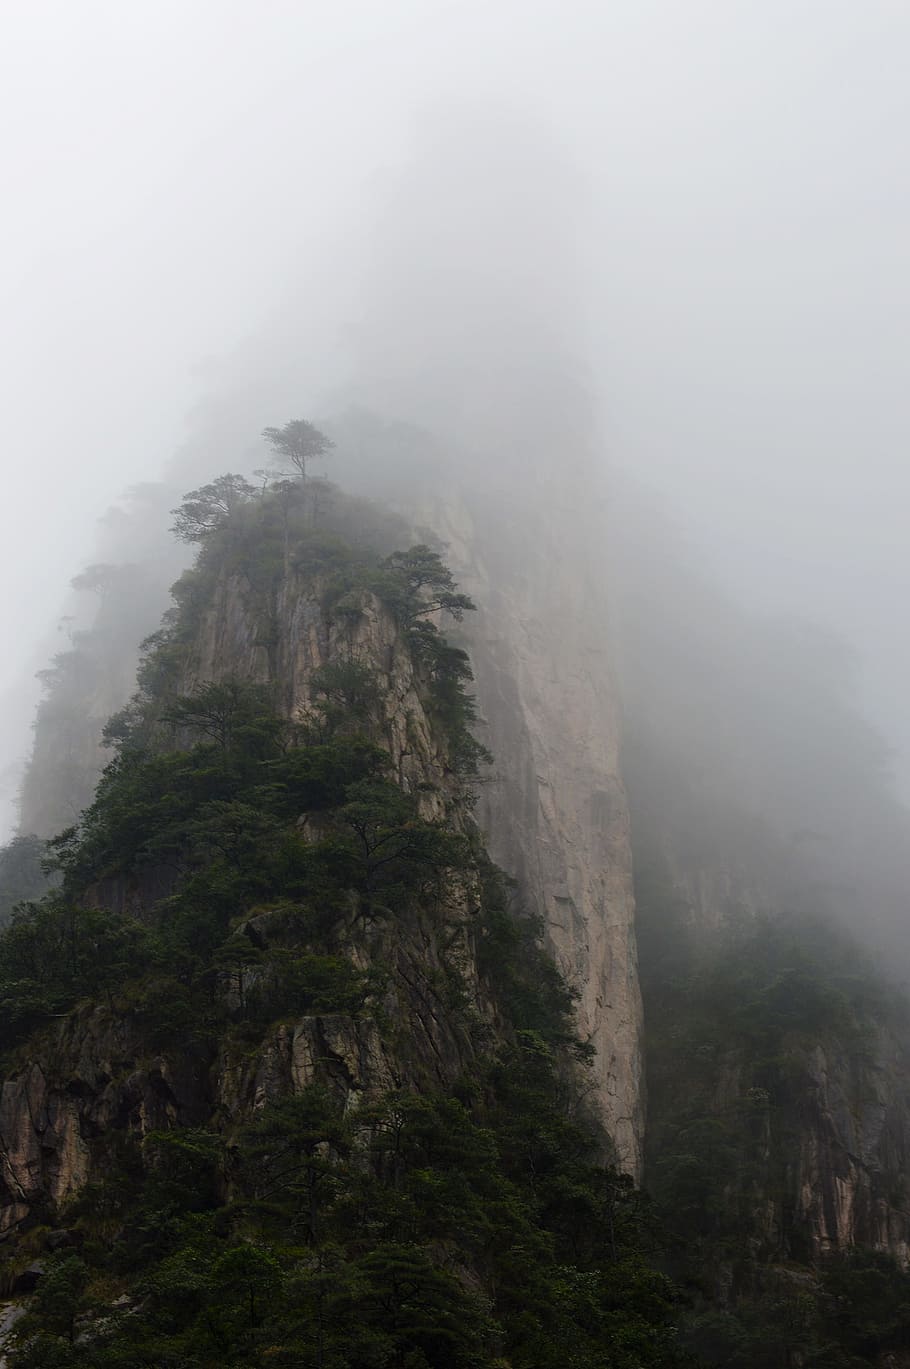 Huangshan, Winter, Surname, Mist, a surname mist, mountains, foggy road, landscape, early in the morning, fog